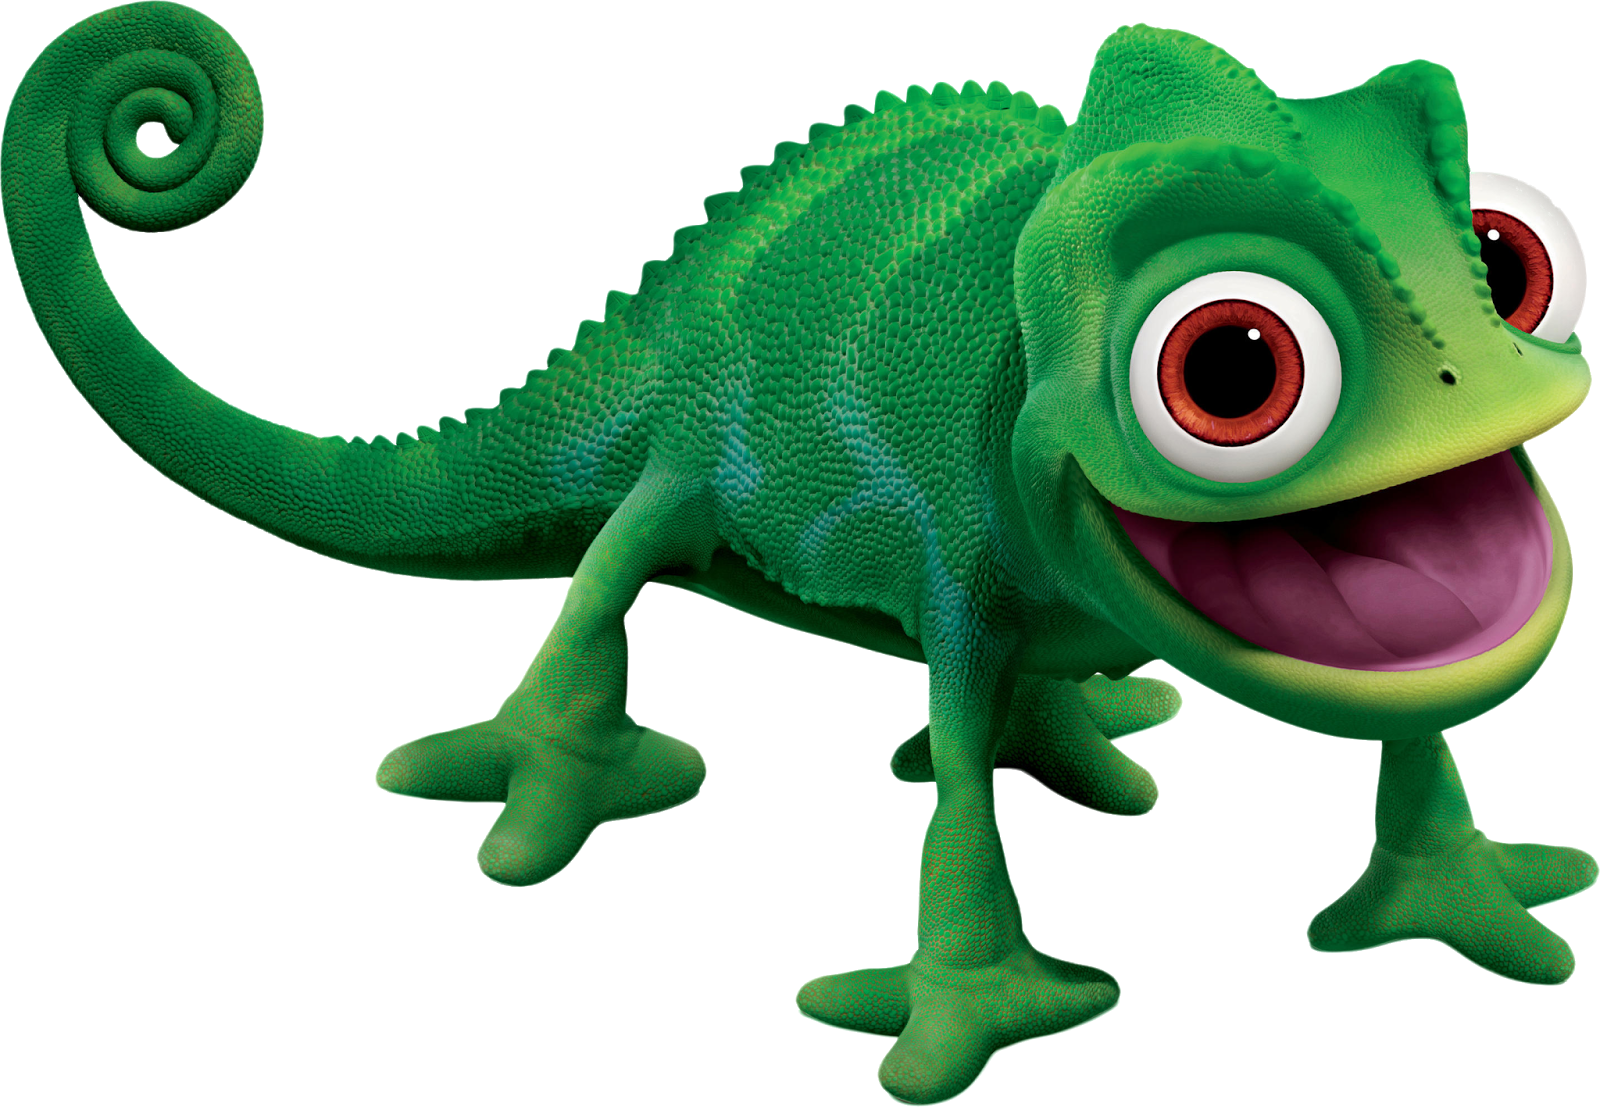 Reptile Chameleon Game Video Rapunzel Tangled The PNG Image